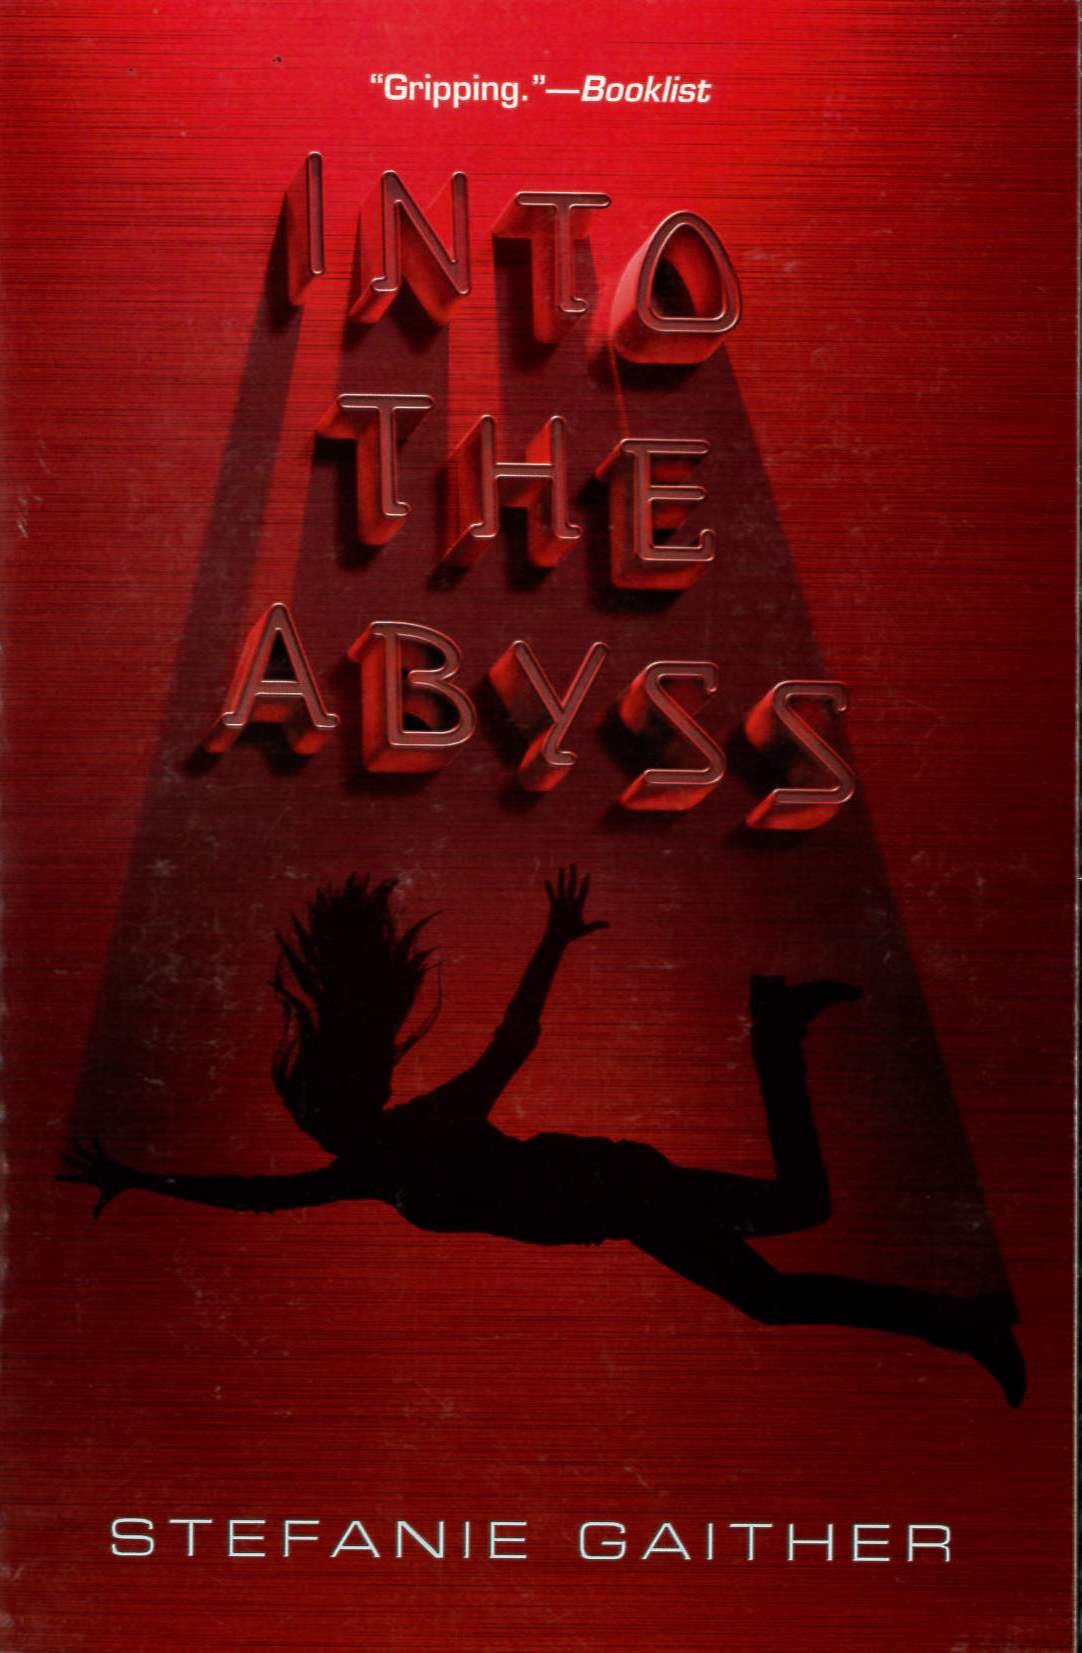 Into the abyss /